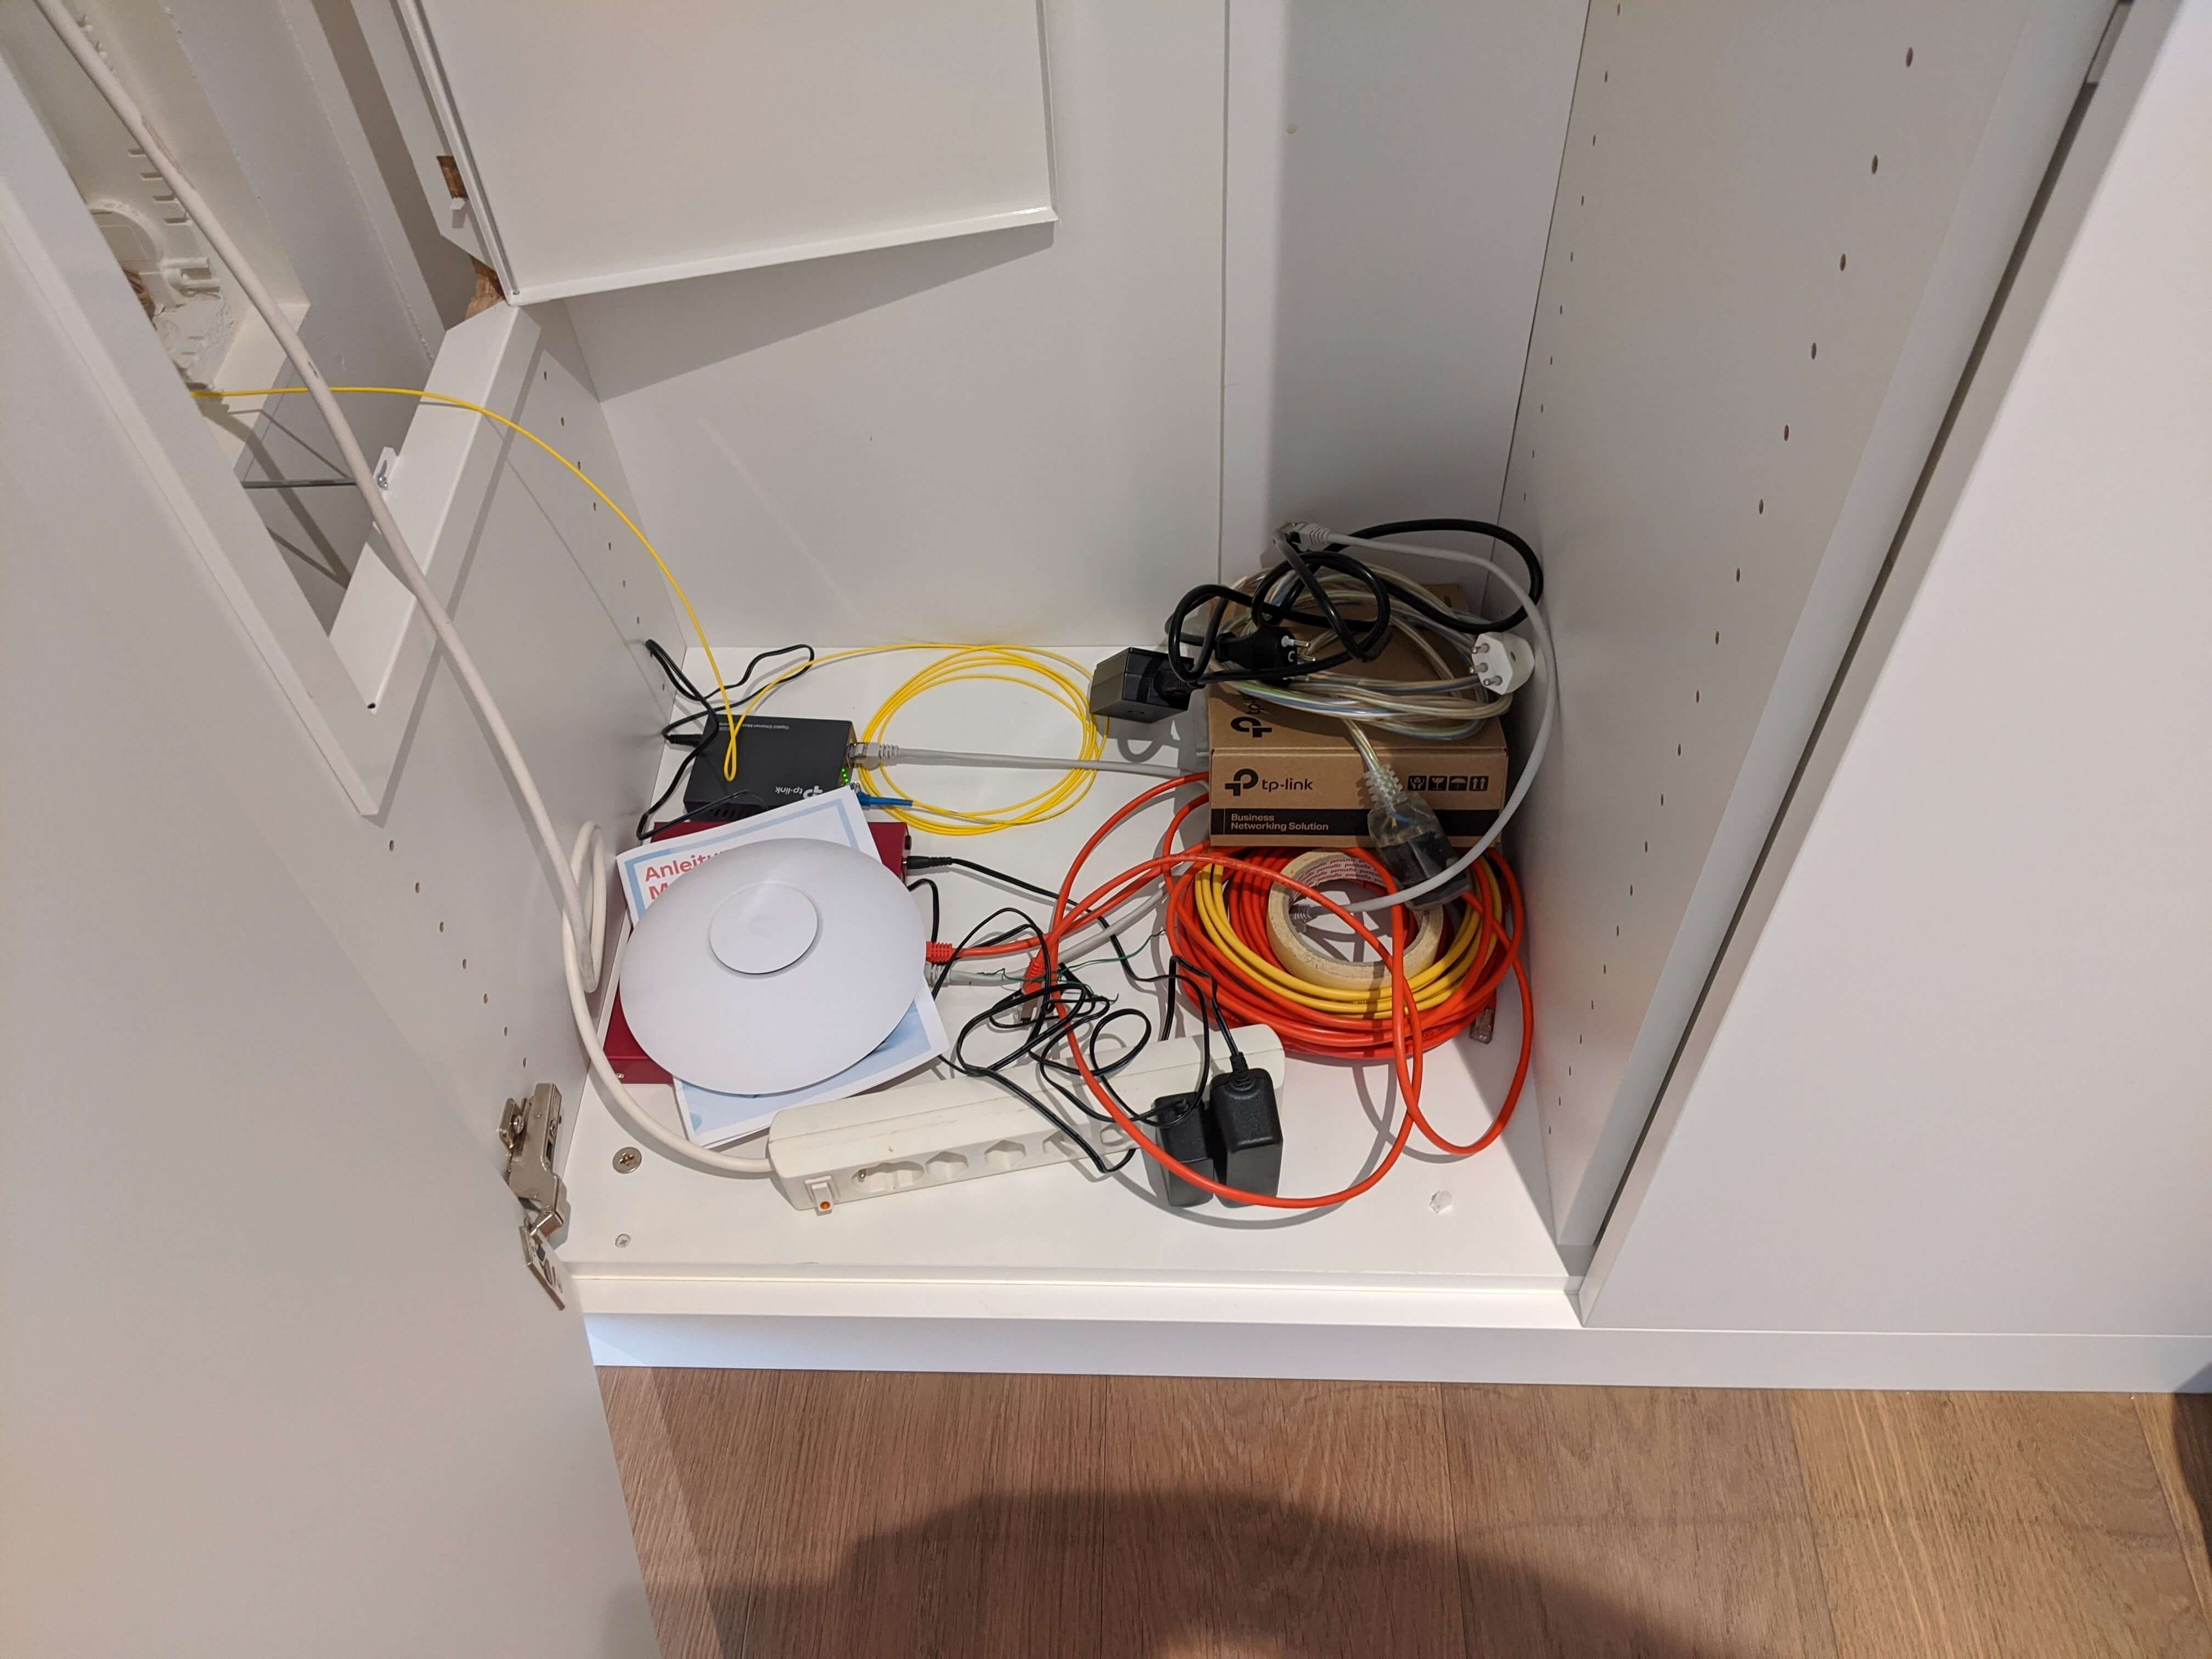 network devices with awful cable management on the floor